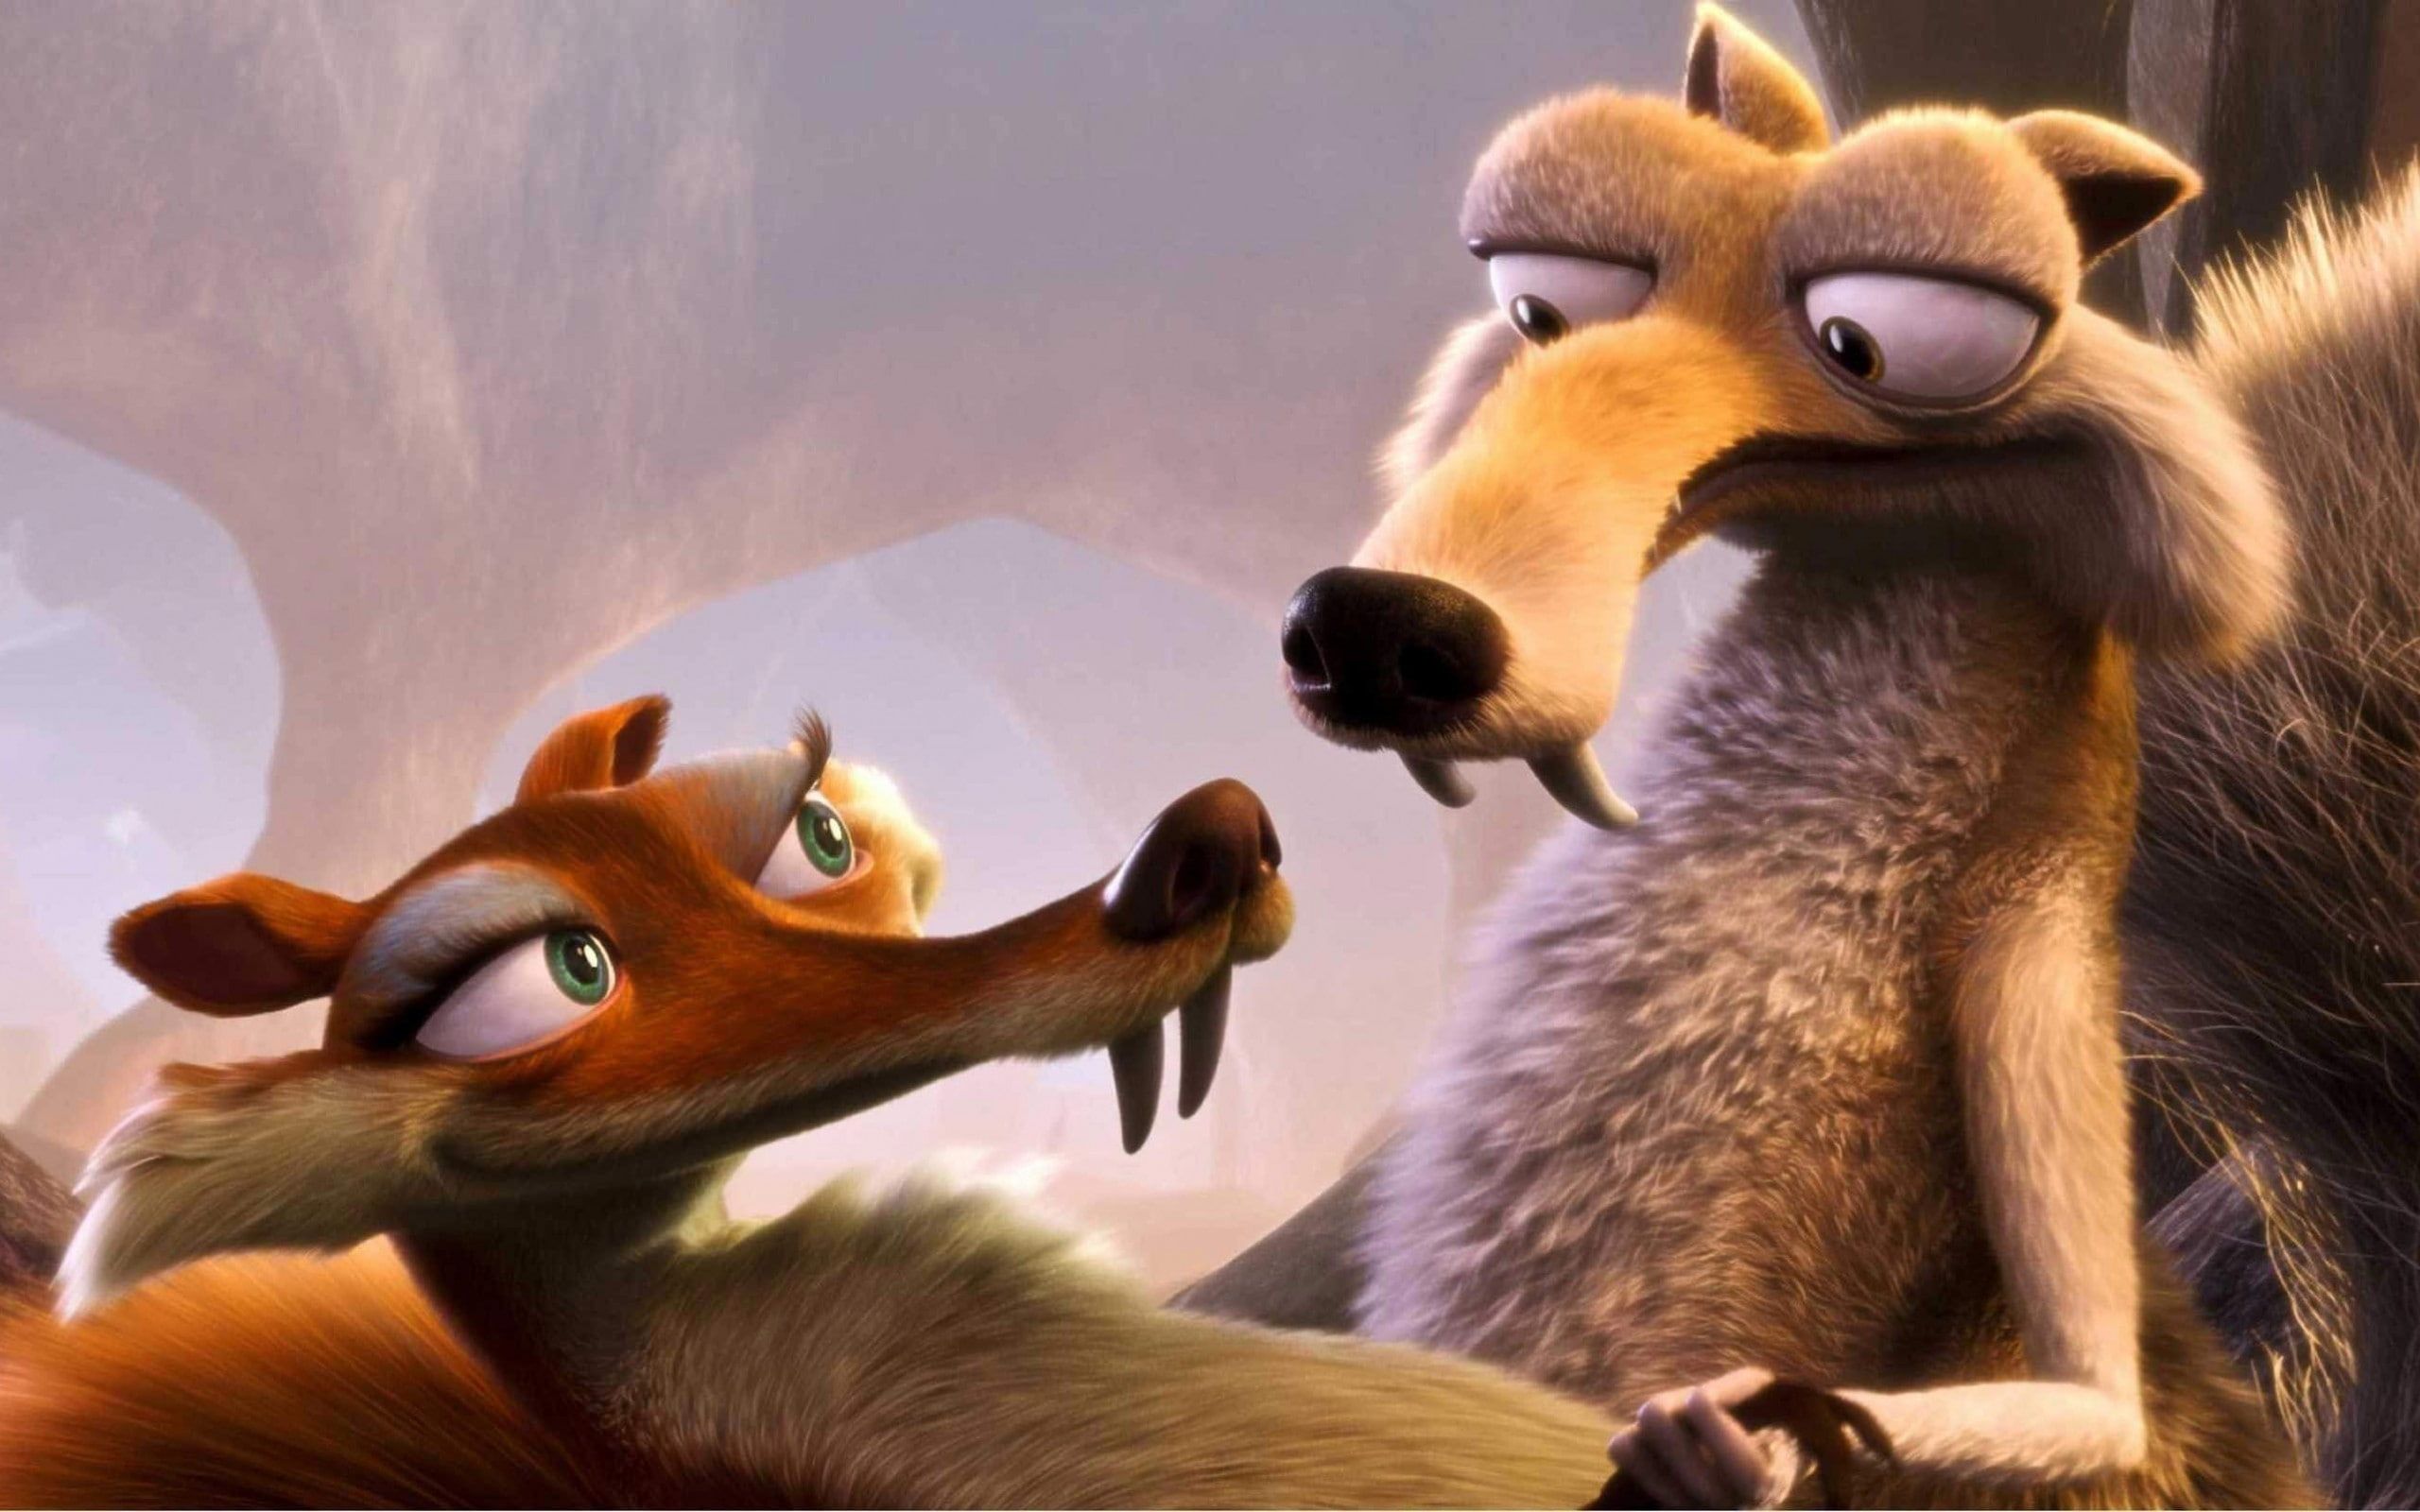 Ice Age #Scrat #Scratte Ice Age: Dawn of the Dinosaurs animated movies #movies K #wallpaper #hdwallpaper #desktop. Ice age, Animated movies, Animation